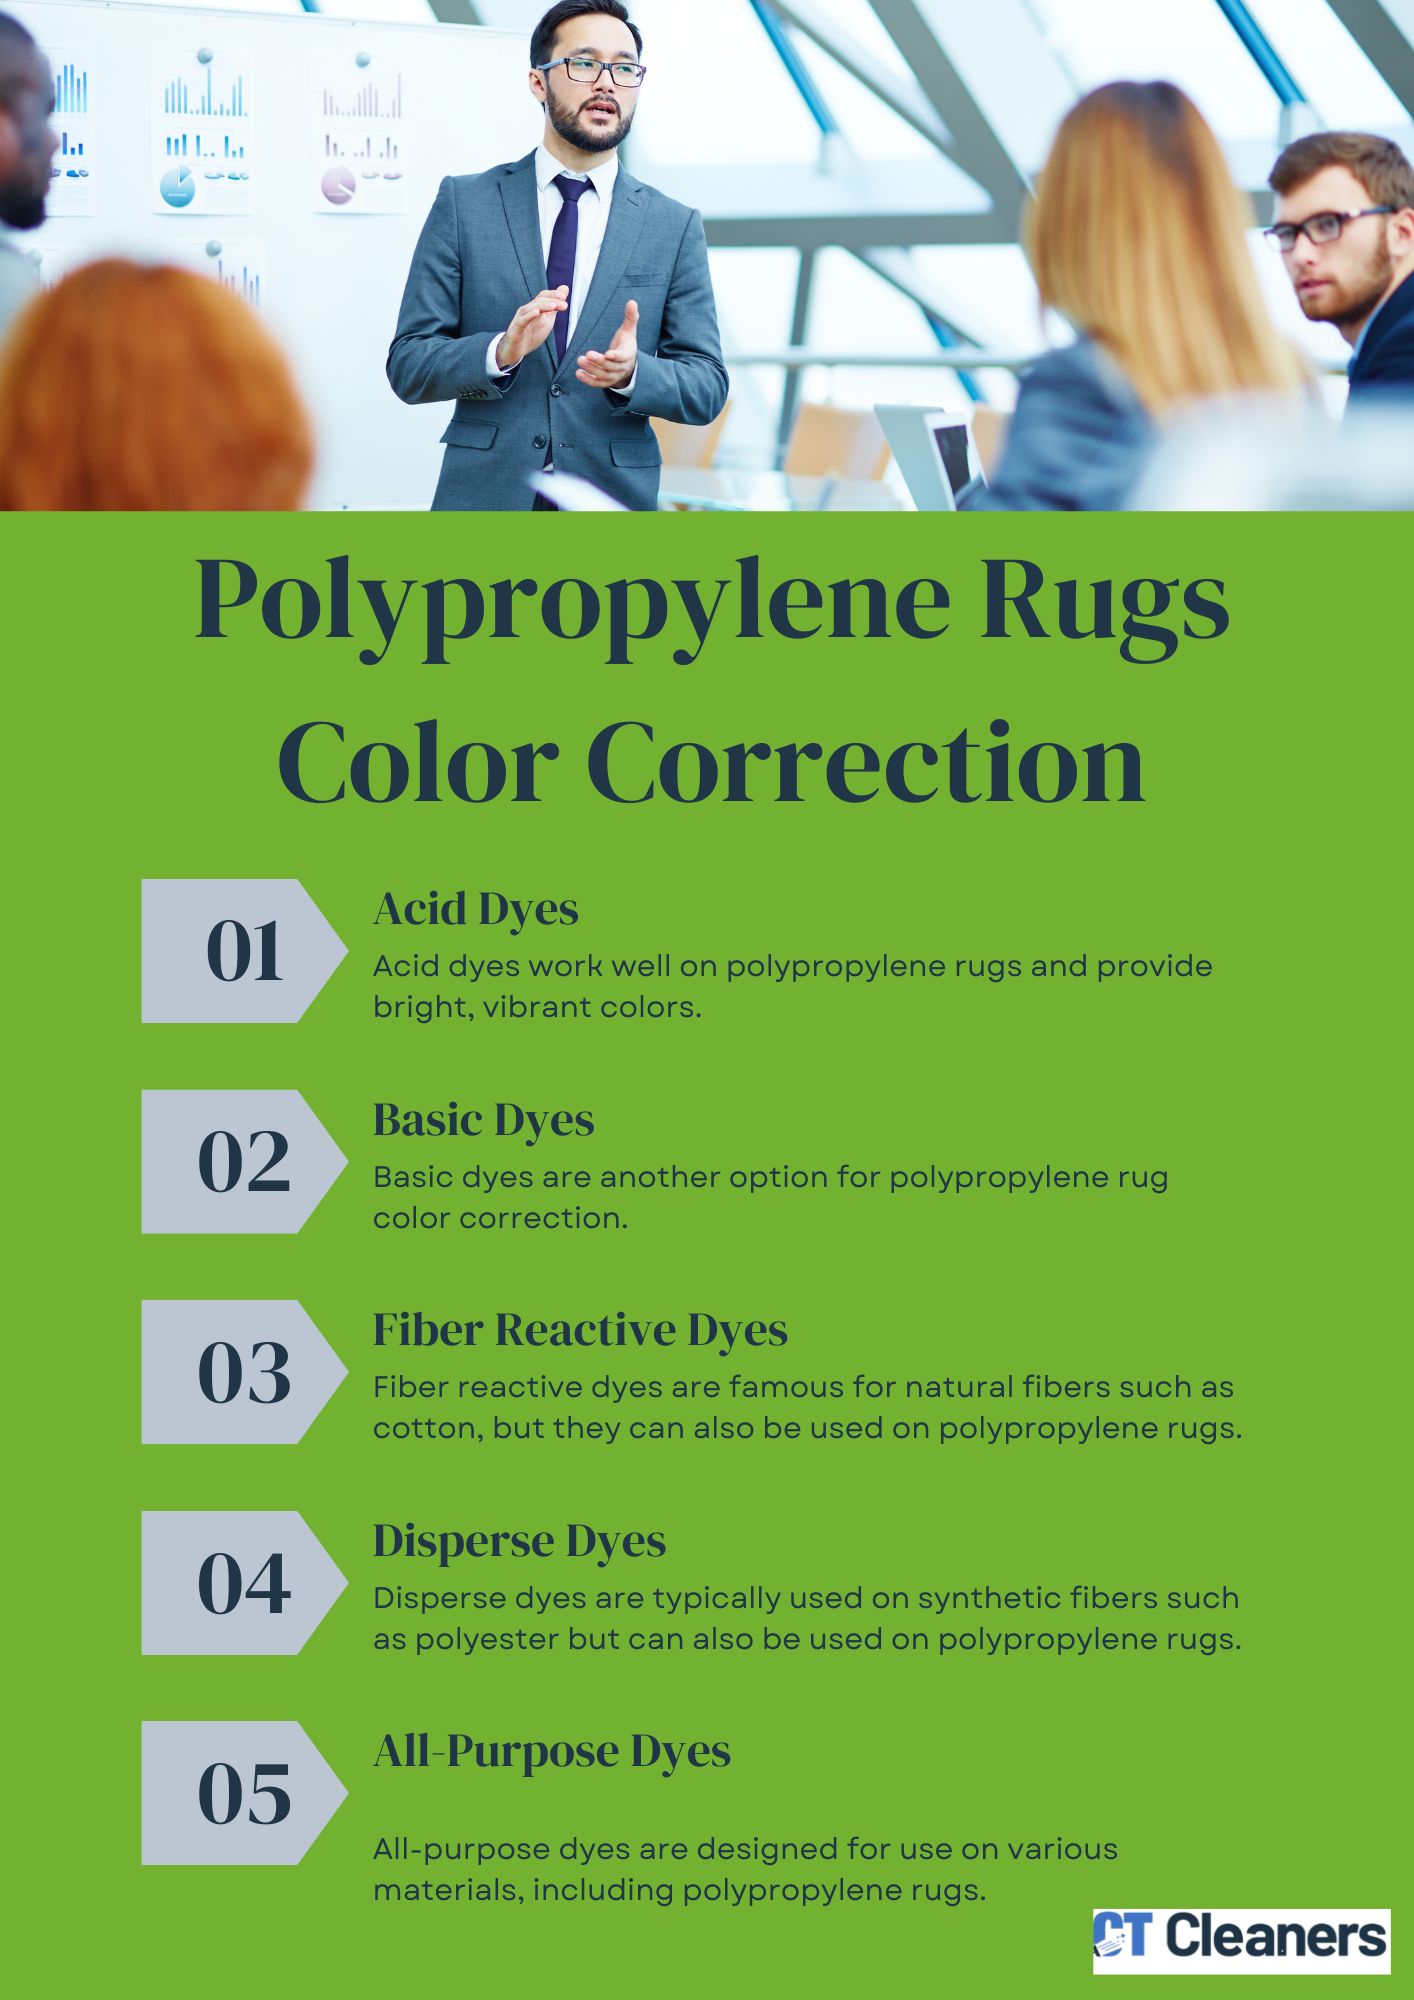 Right Dyes for Polypropylene Rug Color Correction